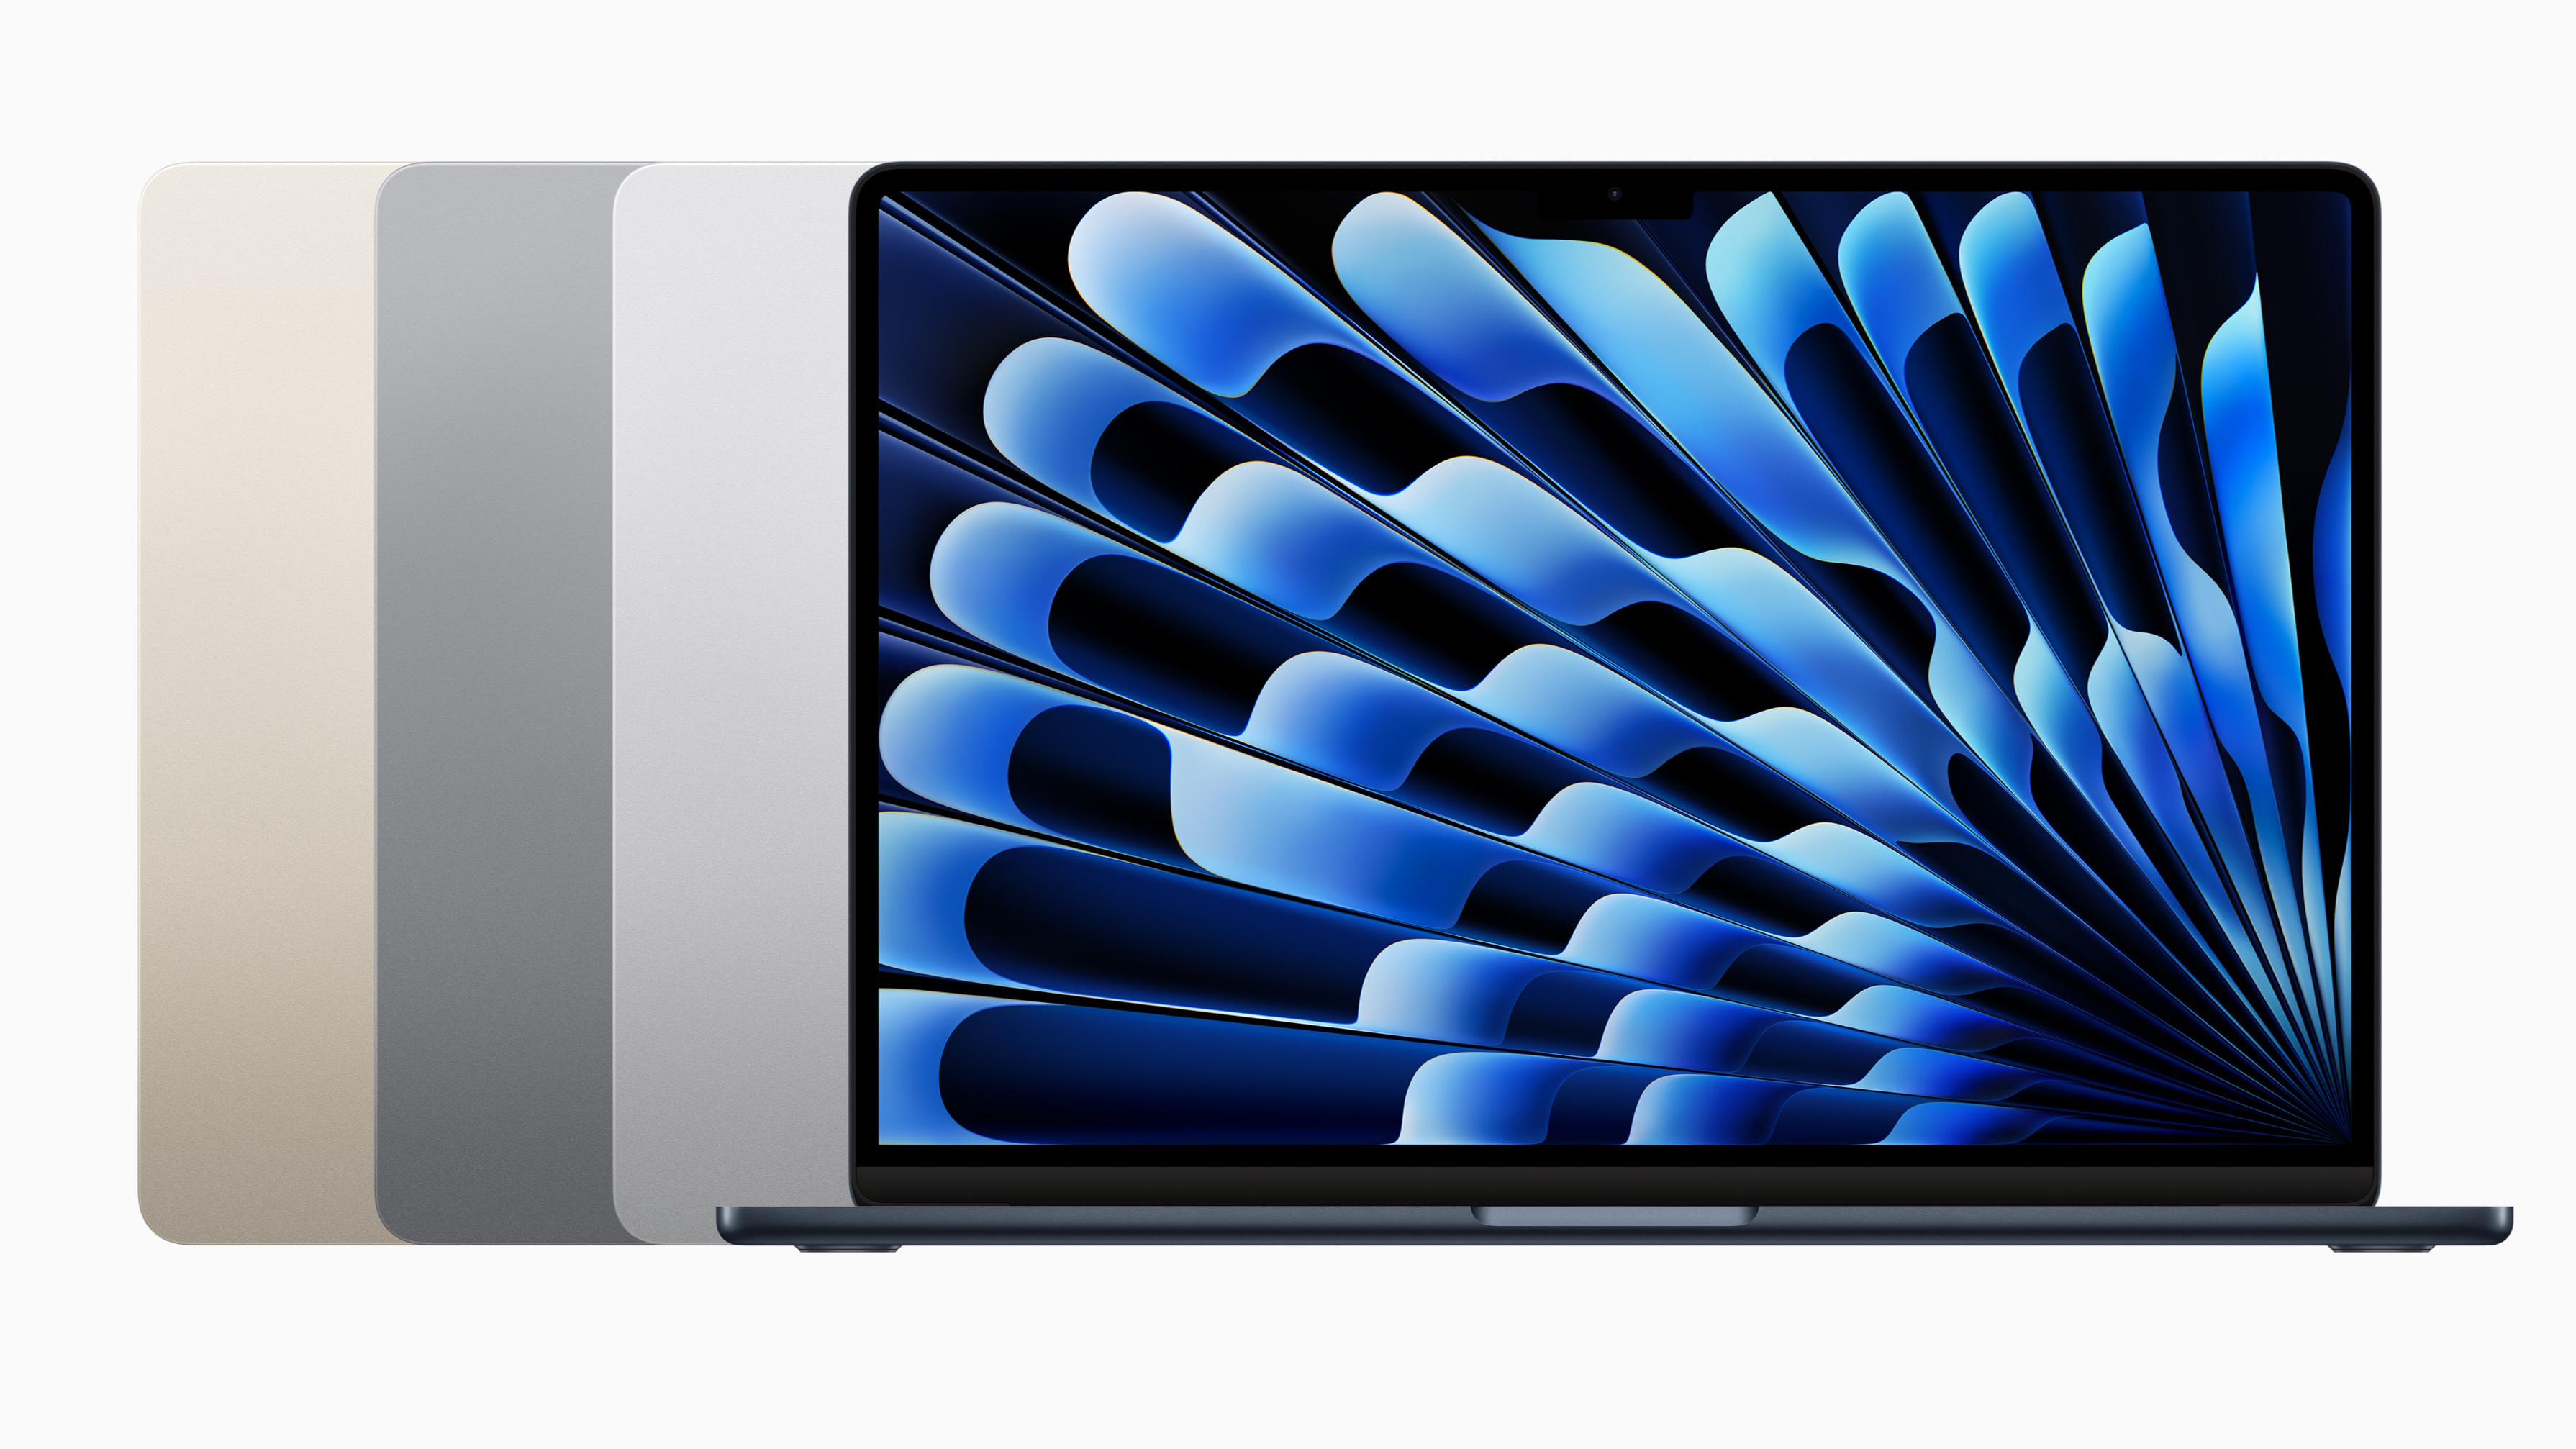 Press shots of the MacBook Air 15-inch laptop with screen open